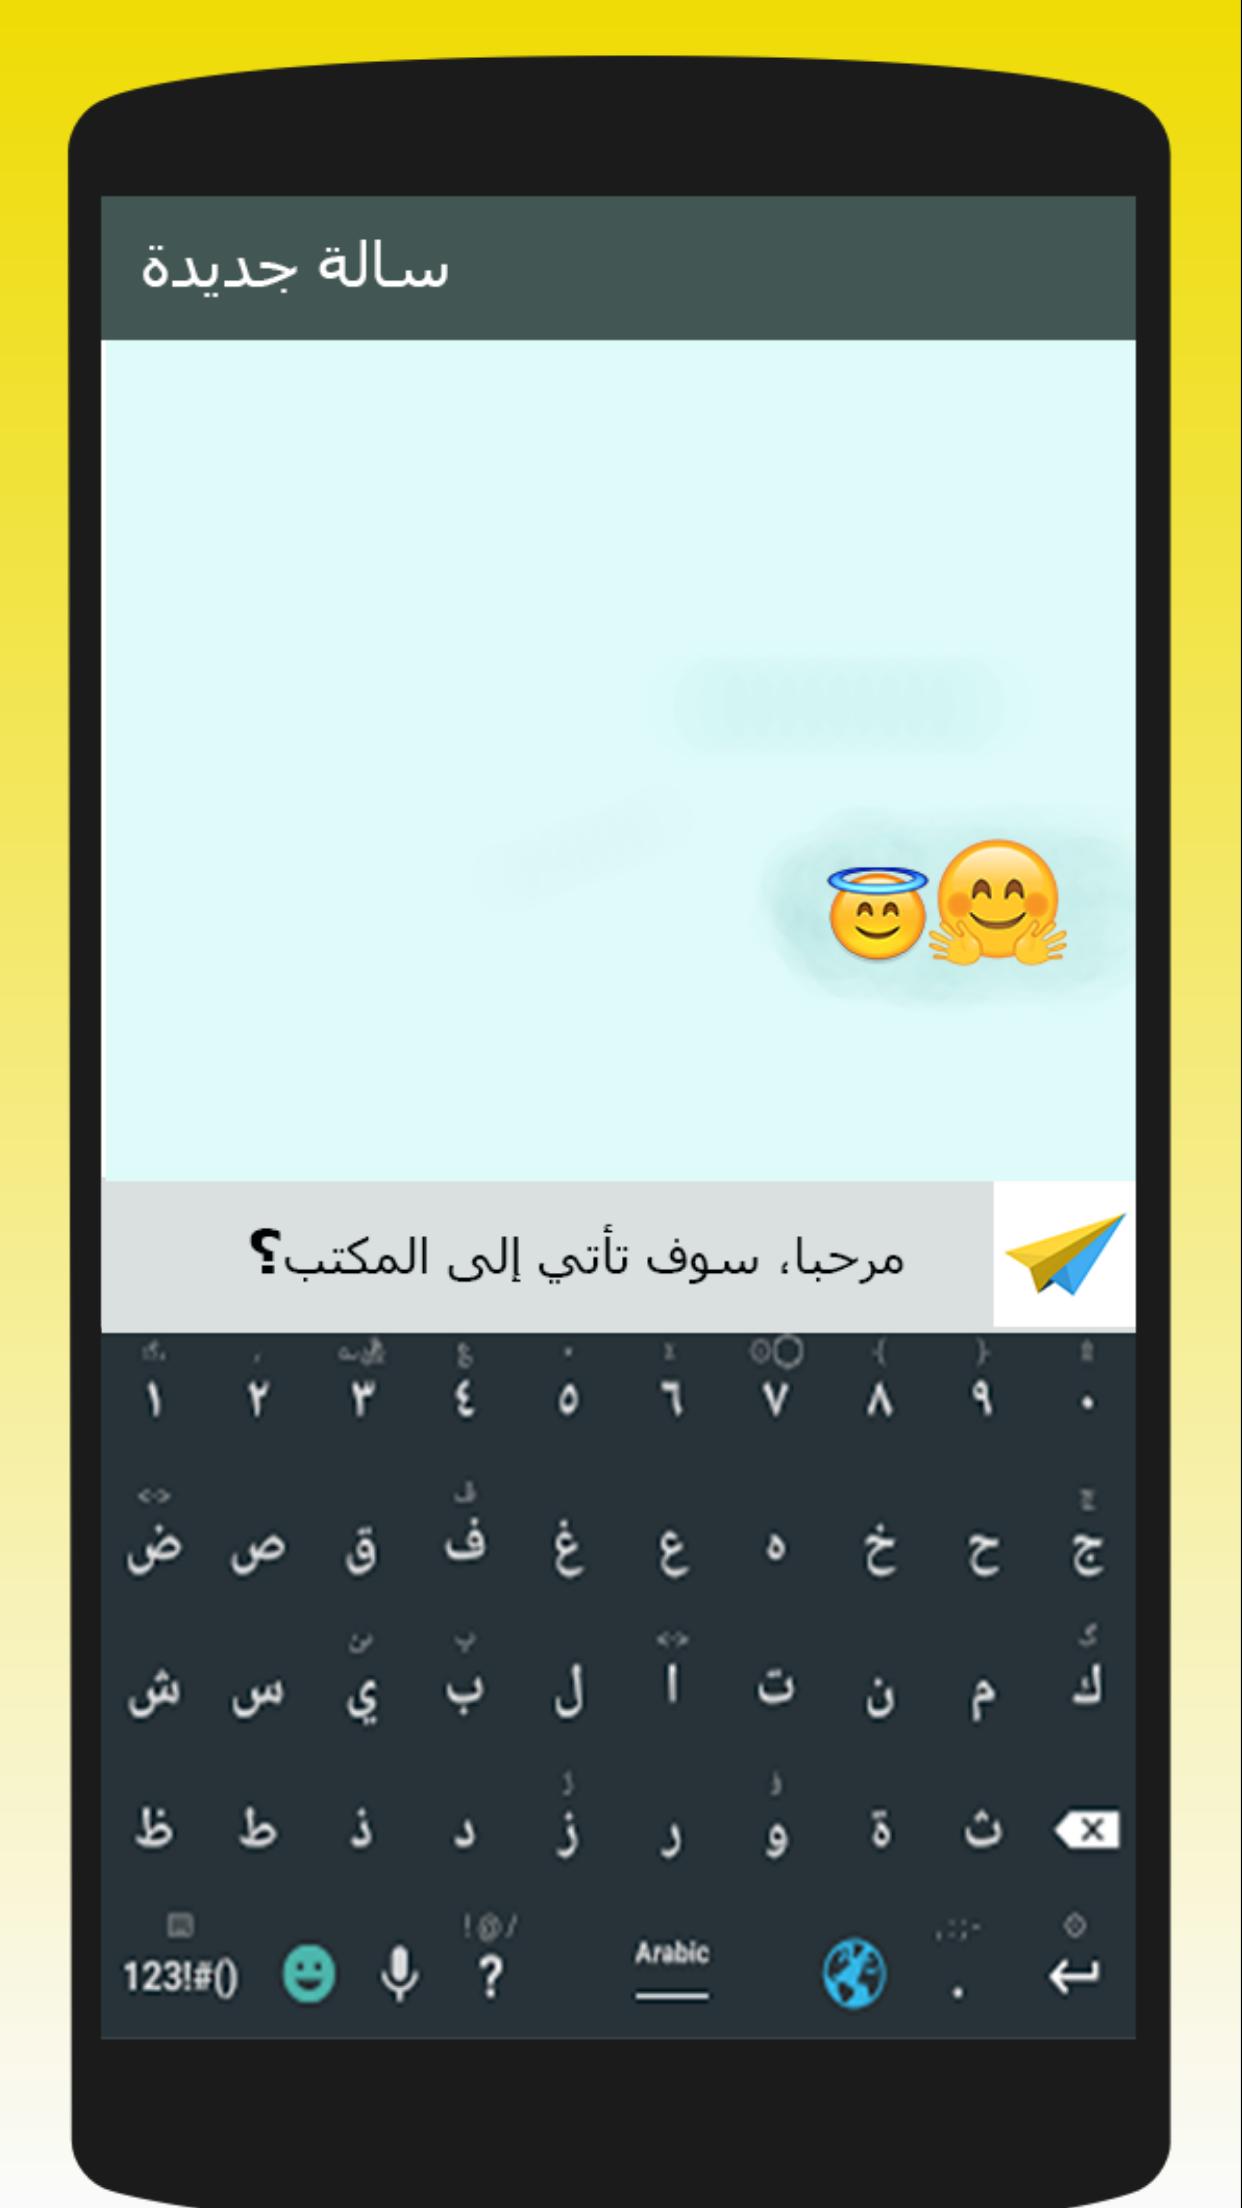 Best Arabic English keyboard - Arabic typing for Android ...